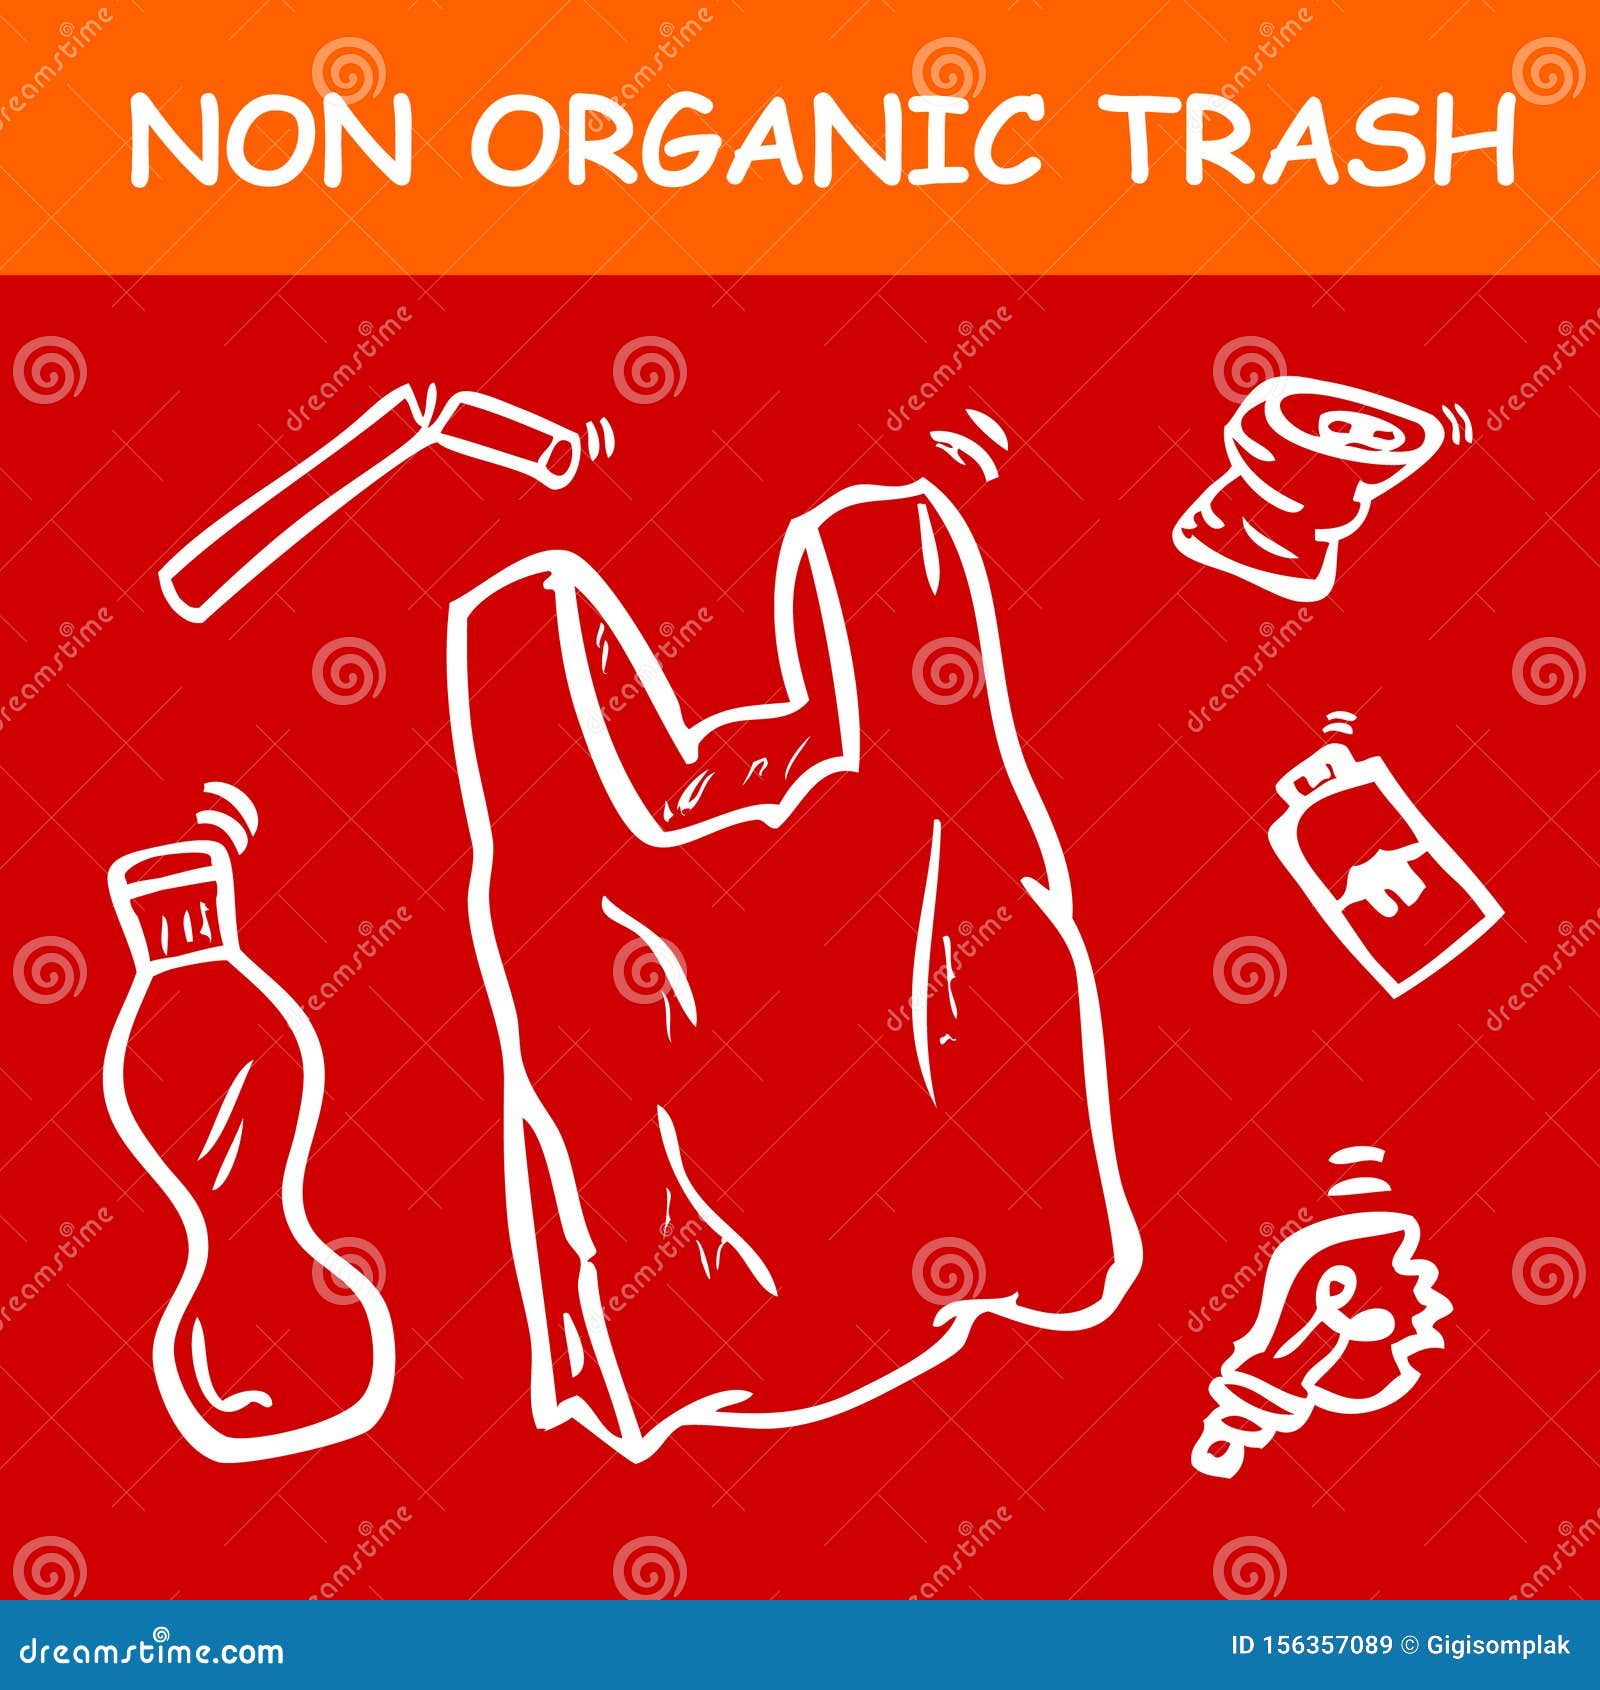 Free Infectious Waste Poster | What Goes Inside a Red Biohazard Bin